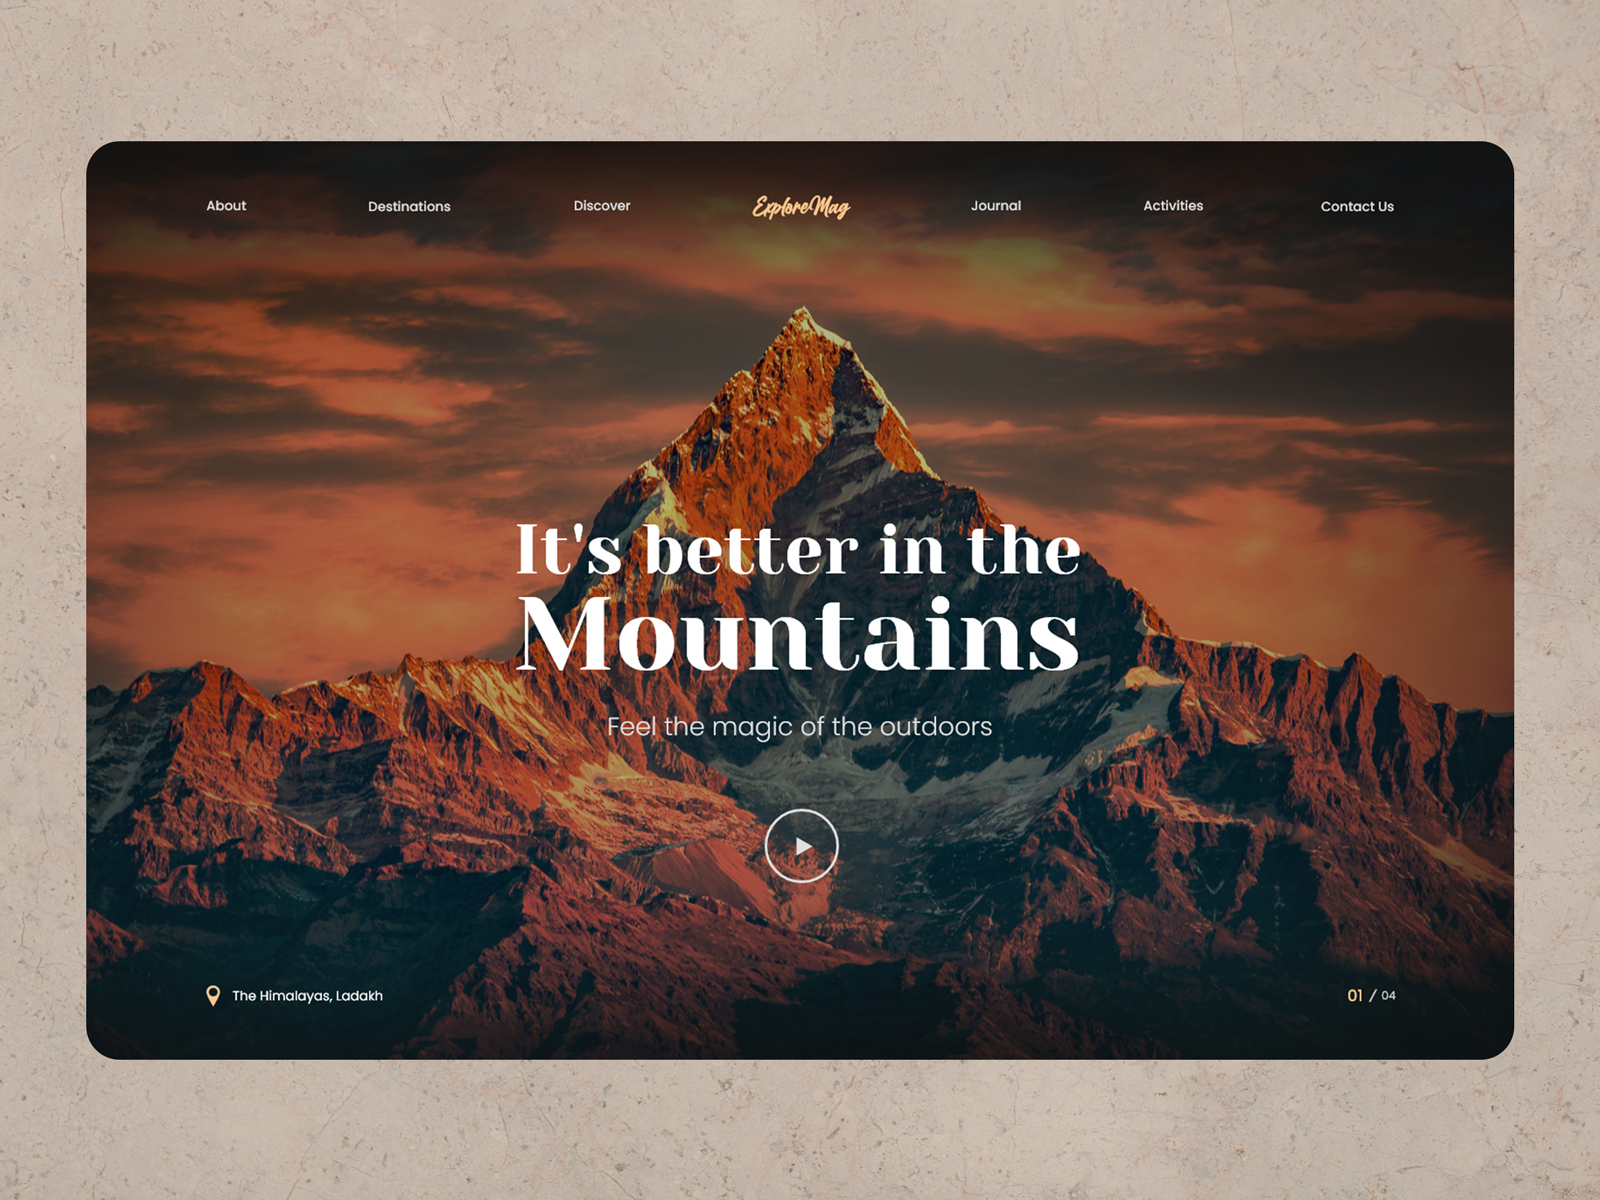 ExploreMag - Hiking Website Homepage by Alazhar Barot on Dribbble